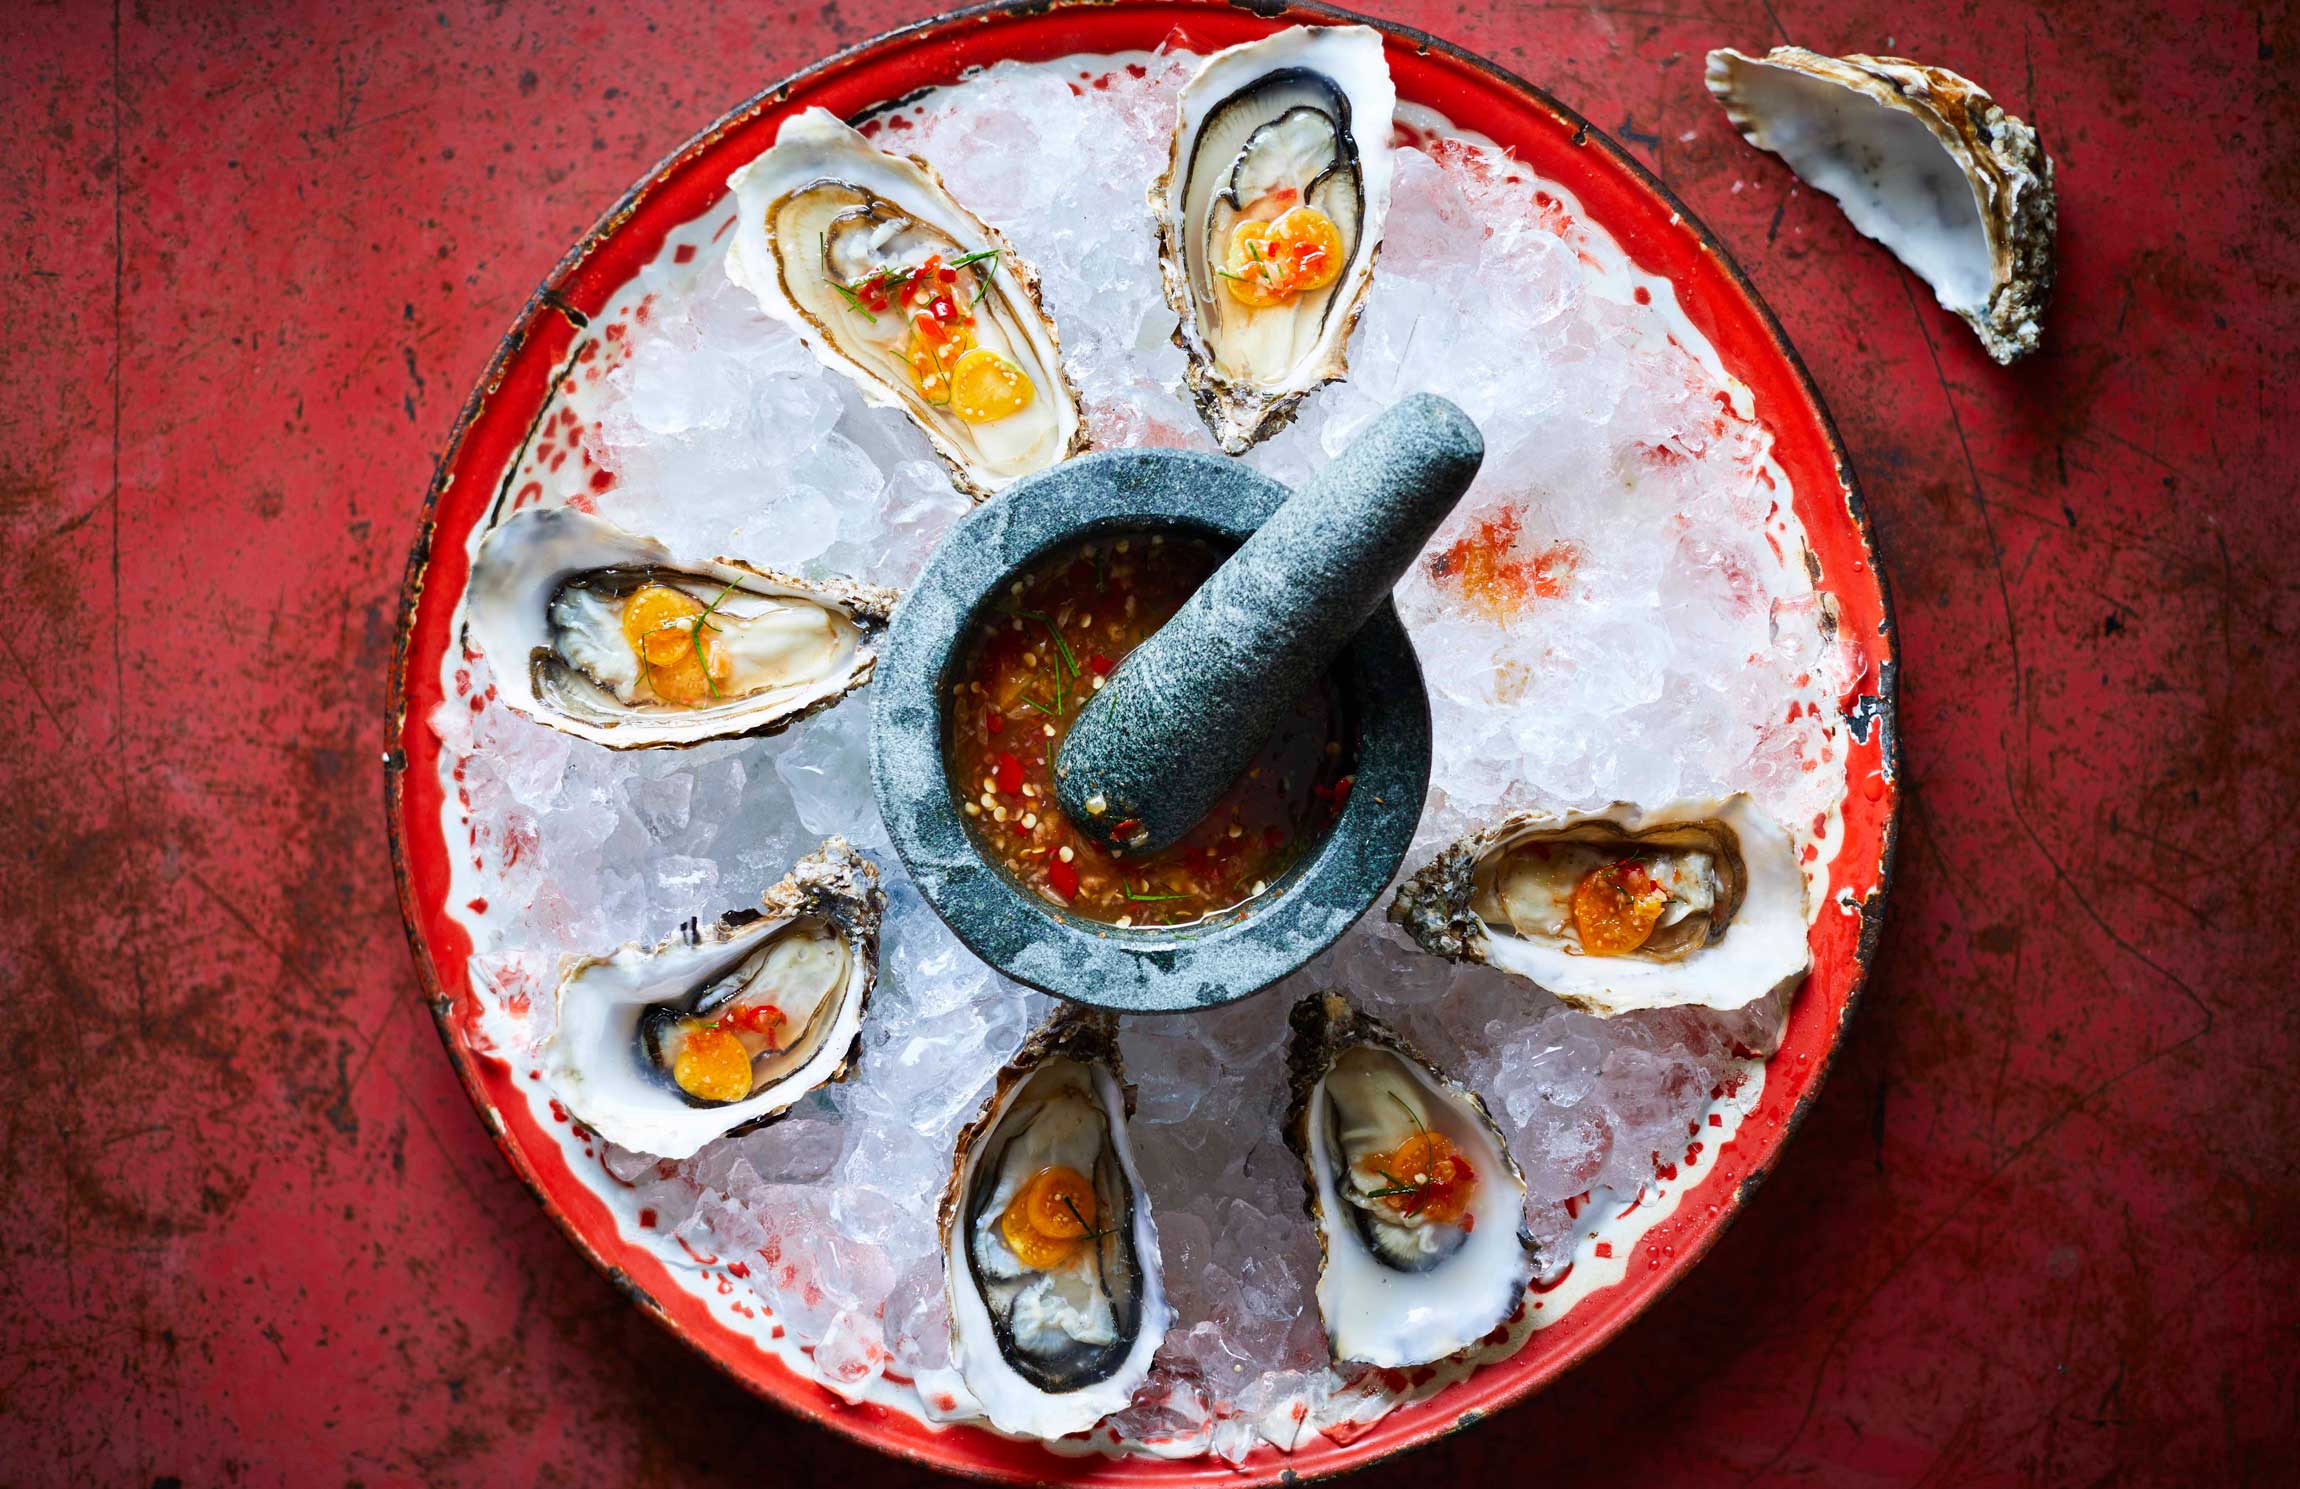 Farang_GRILLED_OYSTERS_WITH_SOUR_FRUITS_CHILLI_AND_LIME.jpg